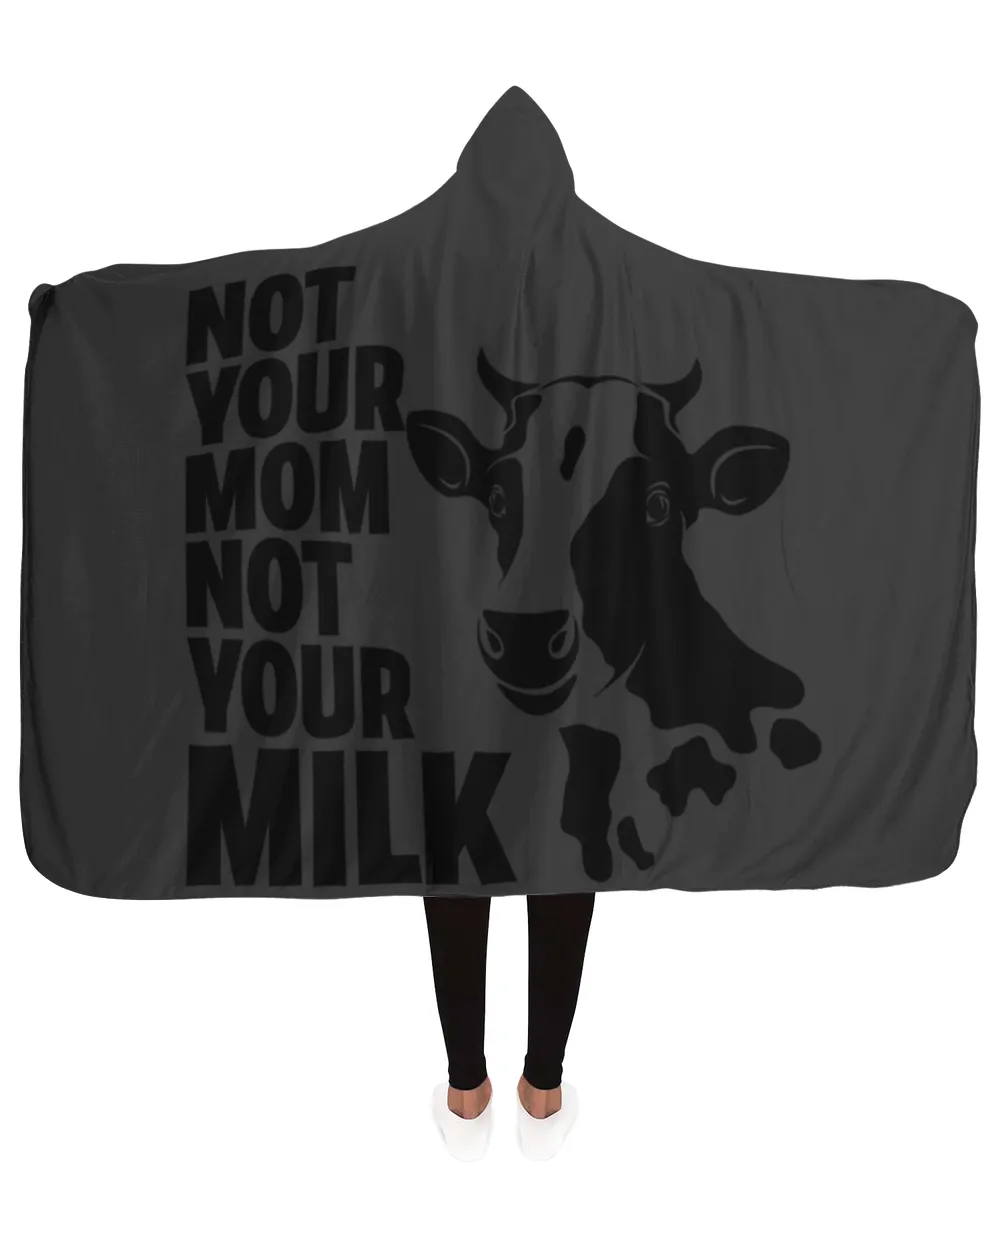 Not your mom not your milk